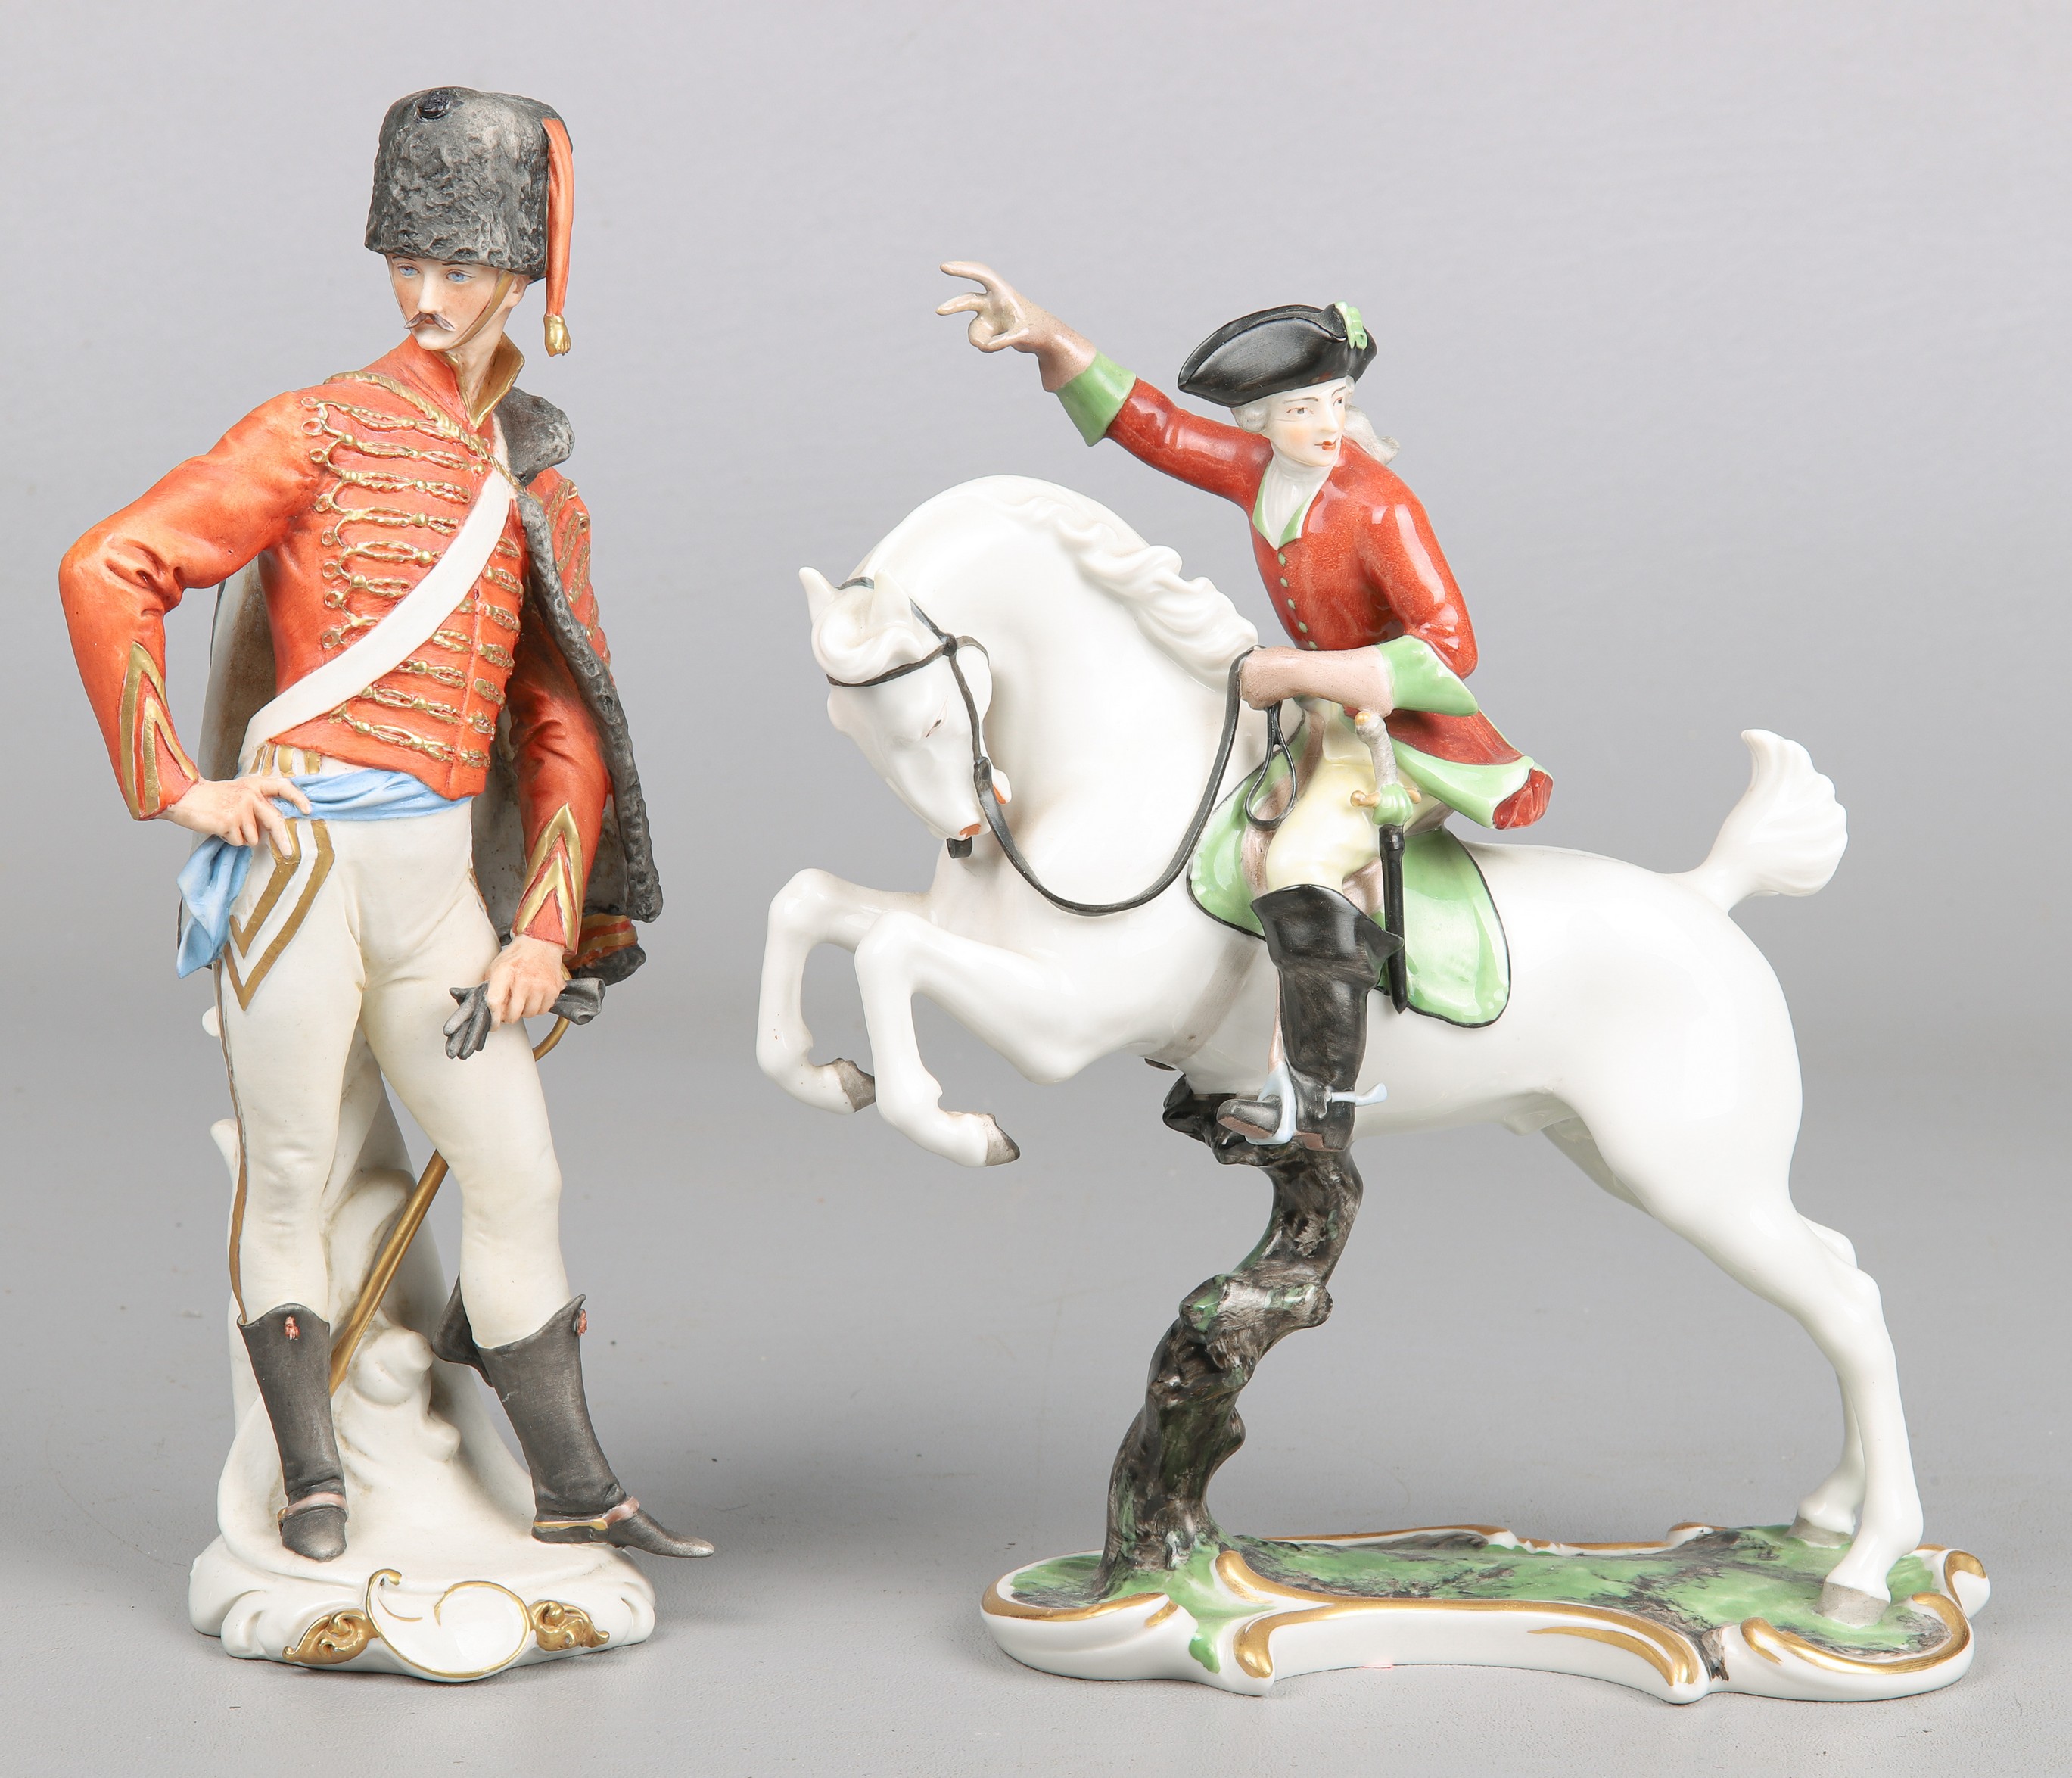 Porcelain and bisque figures to 2e07c8